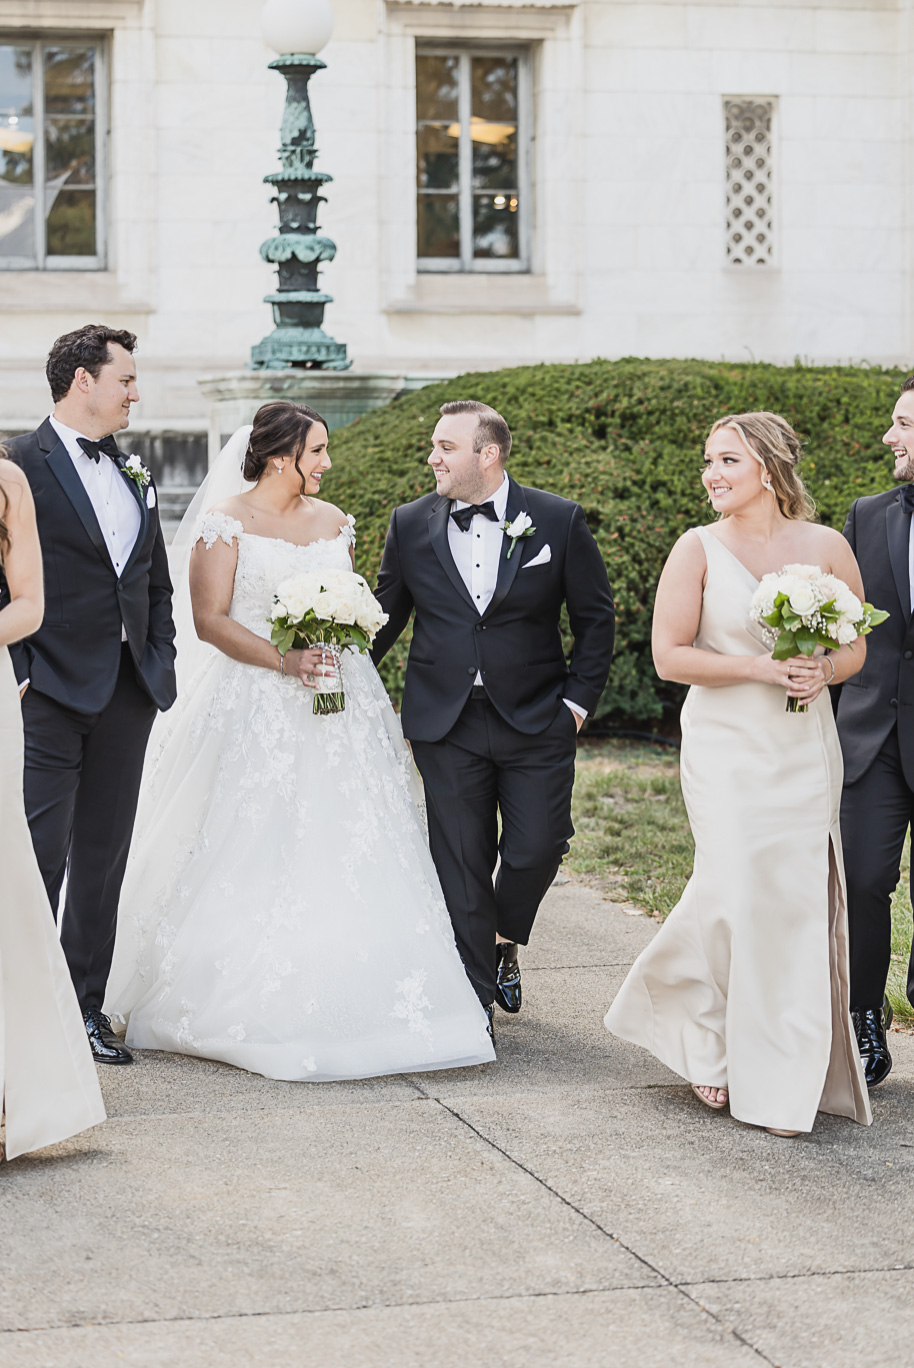 A classic black tie fall Italian wedding at Andiamo in Warren, Michigan provided by Kari Dawson, top-rated Detroit Wedding photographer, and her team.